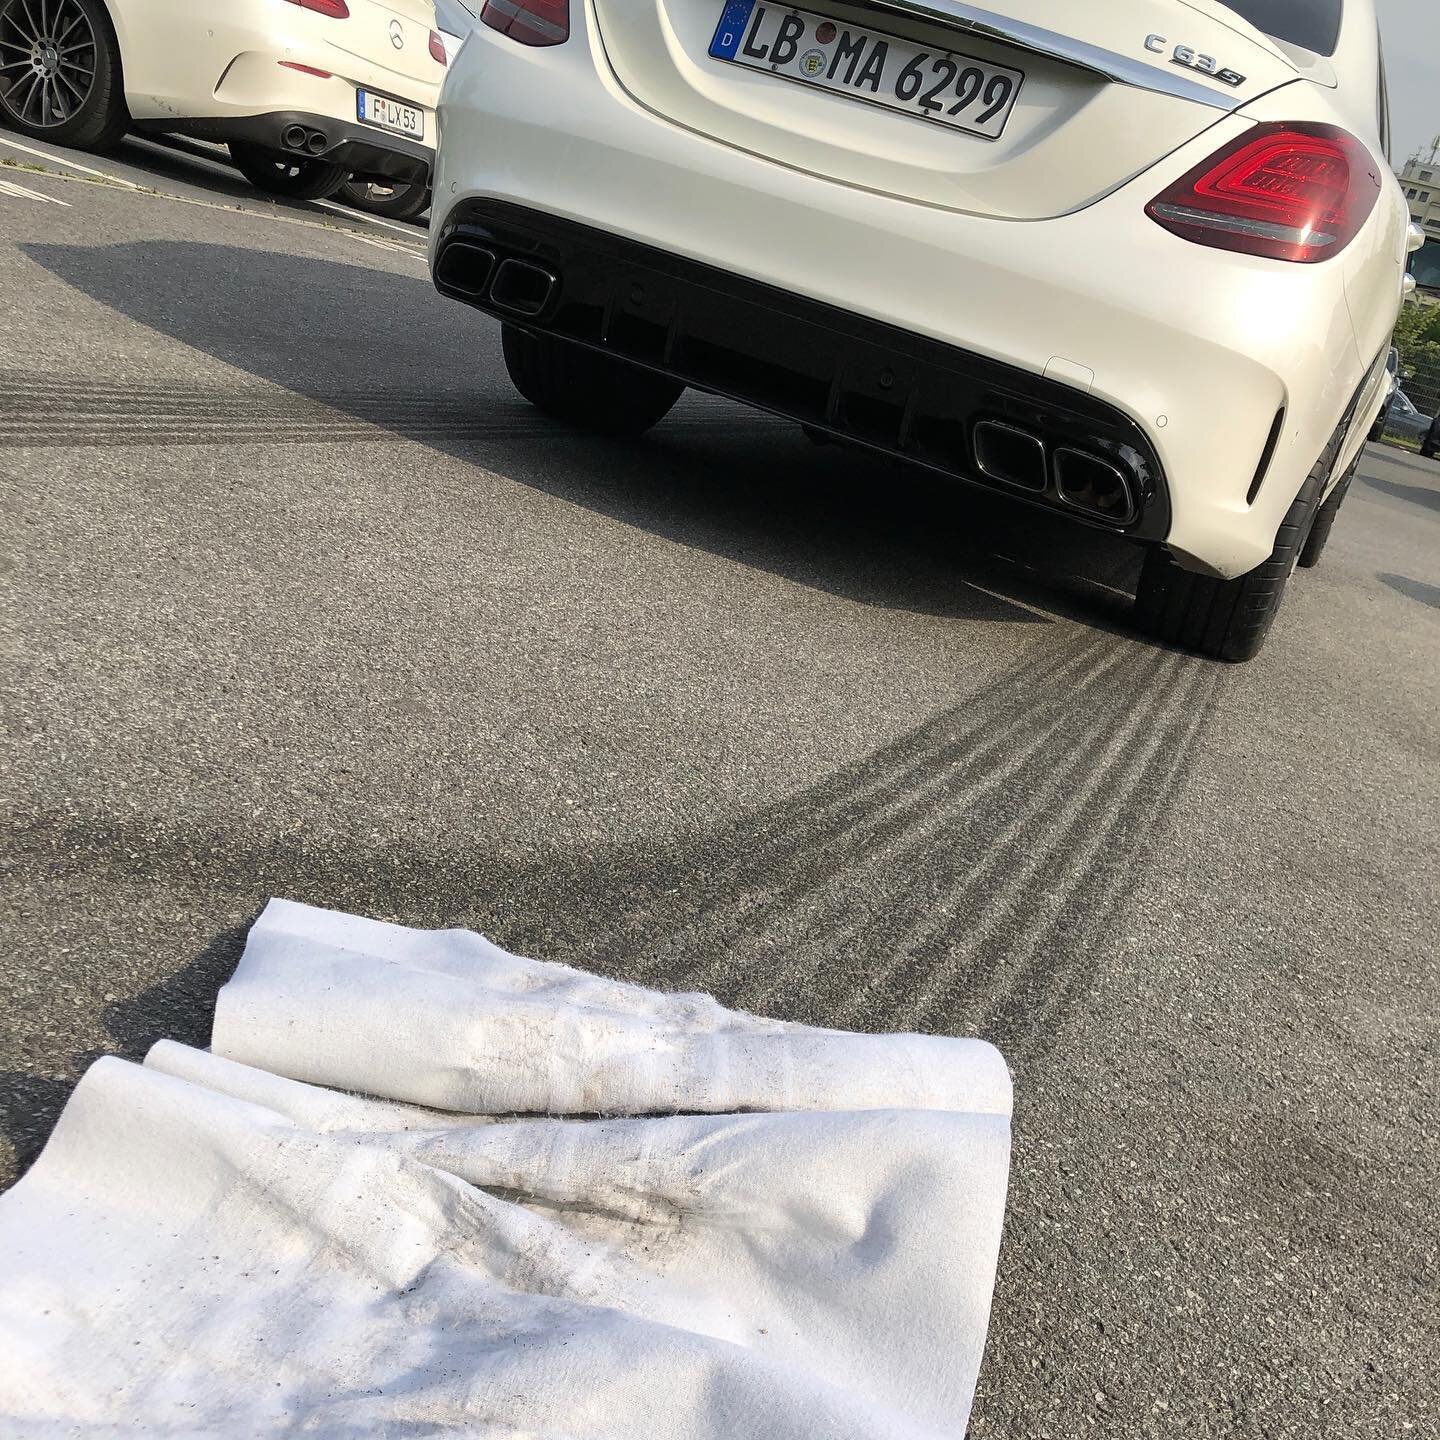 Customer: Mercedes-AMG Working: BurnOut-Production.  Limited Edition: very soon.  Handcrafted in Frankfurt  @mercedesamg  @mercedesamgf1  @mercedesbenzme  @mercedesbenzmexico  @mercedesbenz_hamburg_luebeck